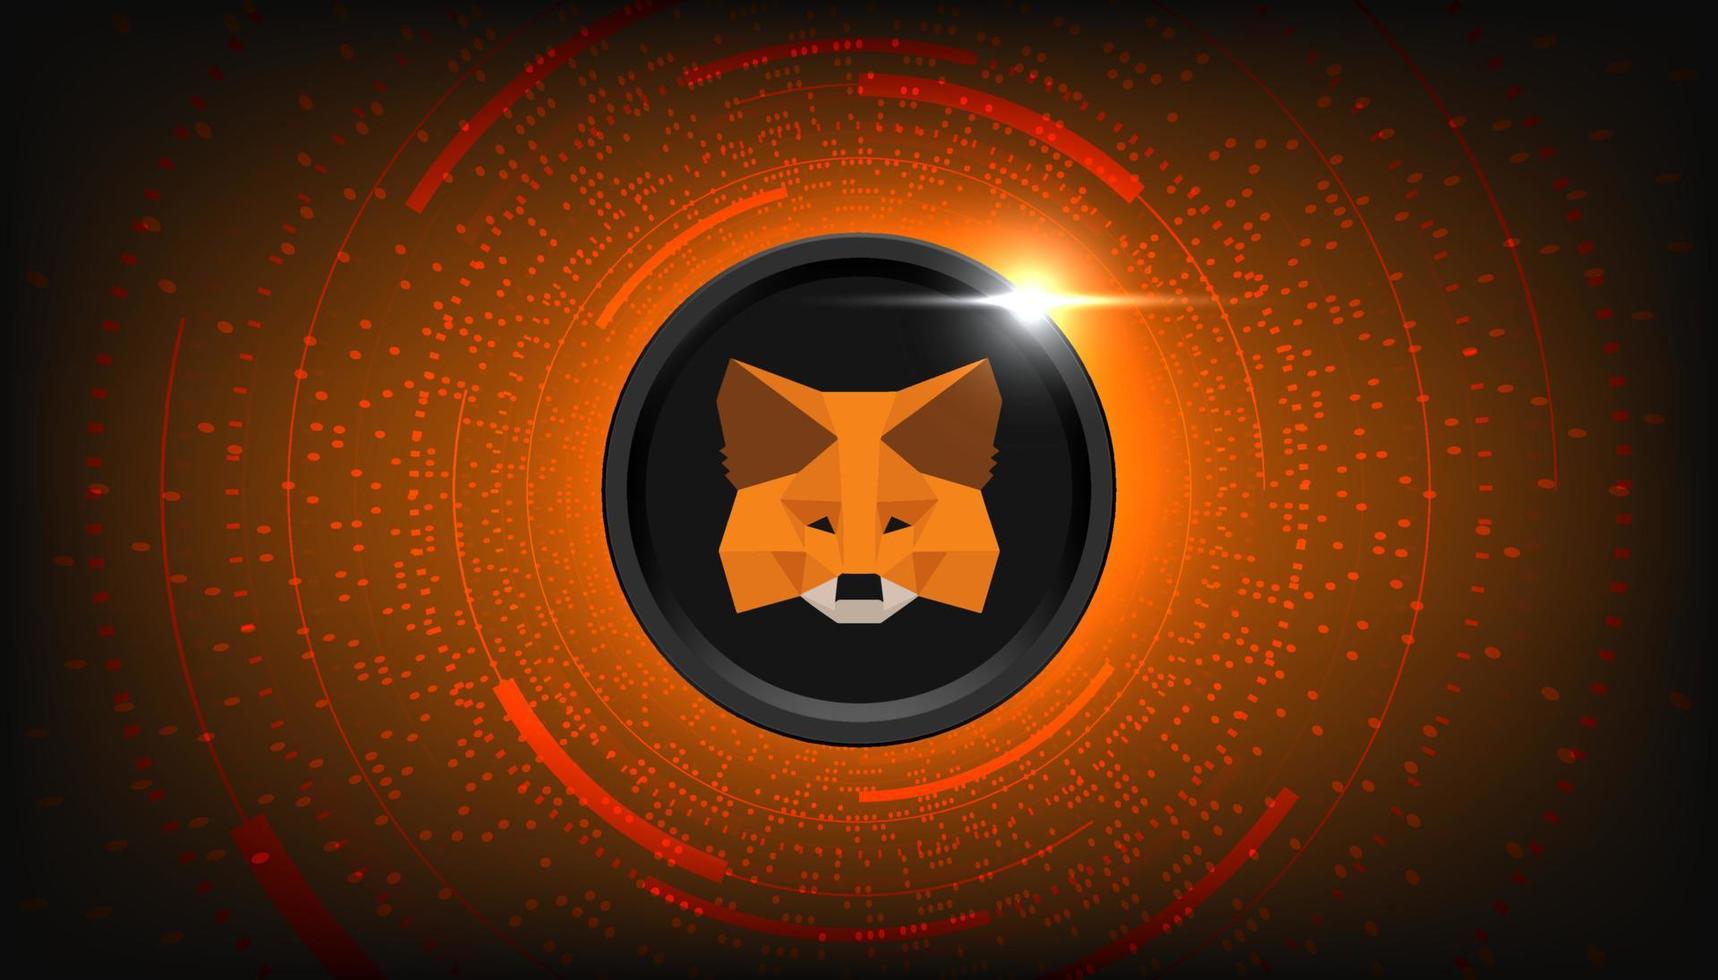 MetaMask Exploring Bitcoin Integration: Company Urges Users to 'Stay Tuned'